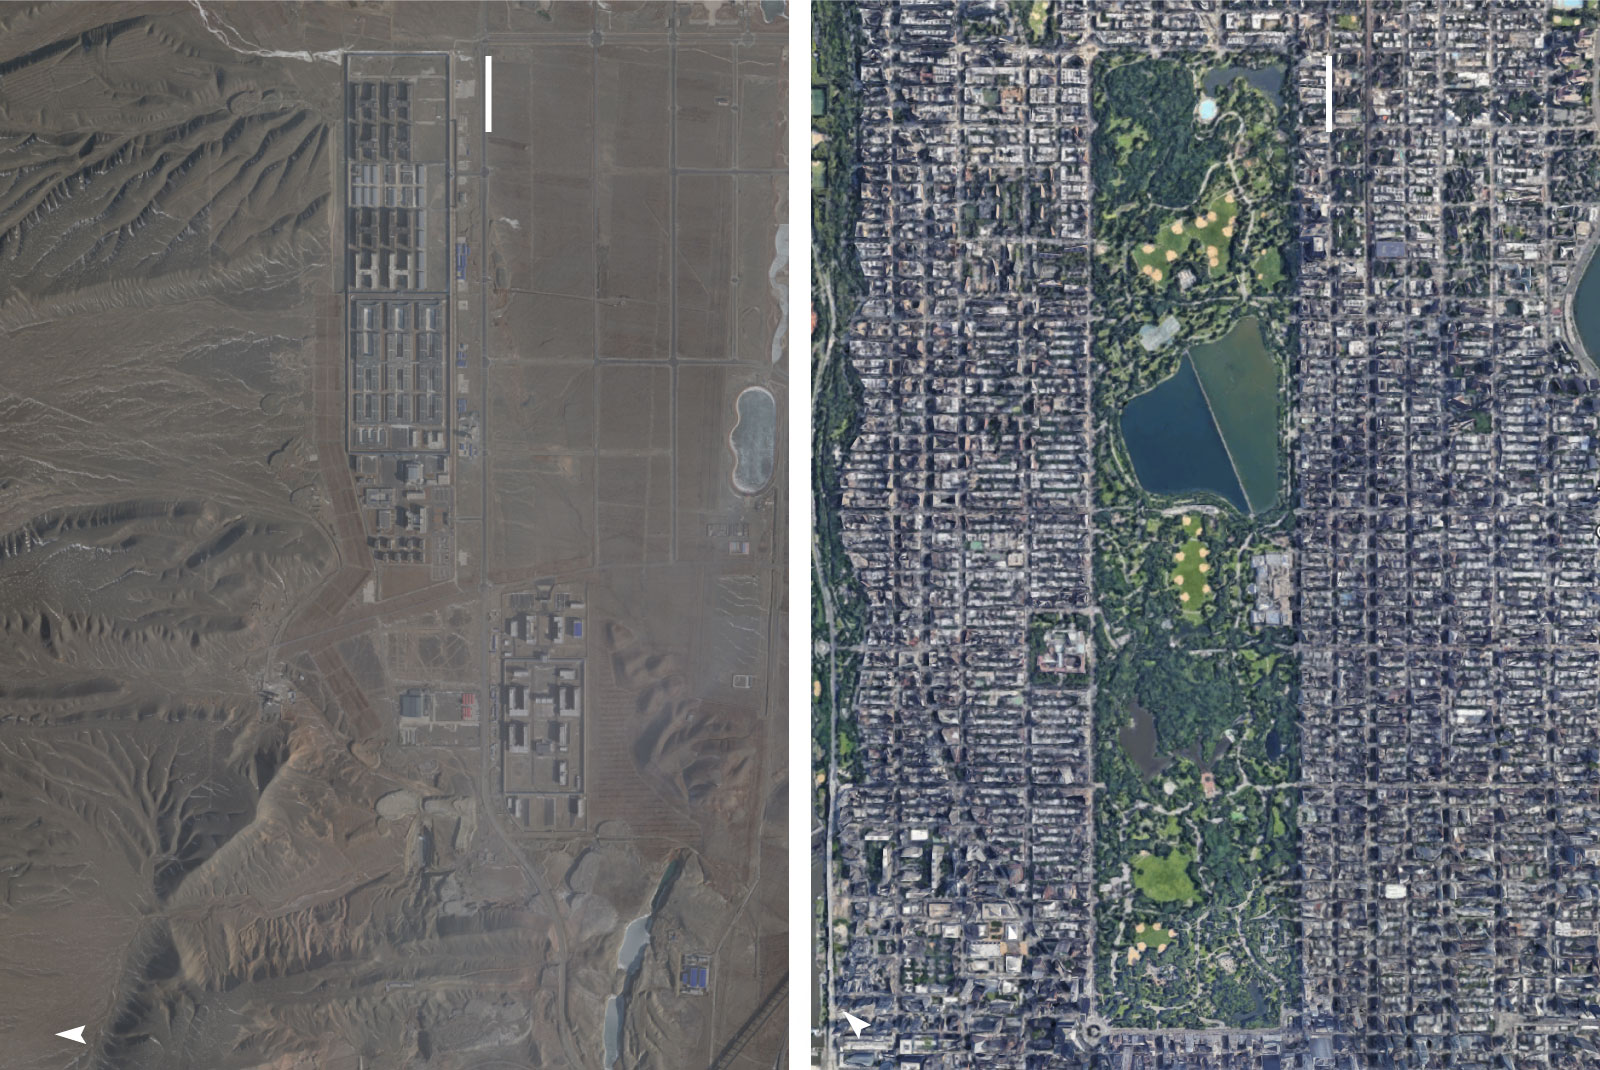 Satellite images comparing the size of Dabancheng to Central Park